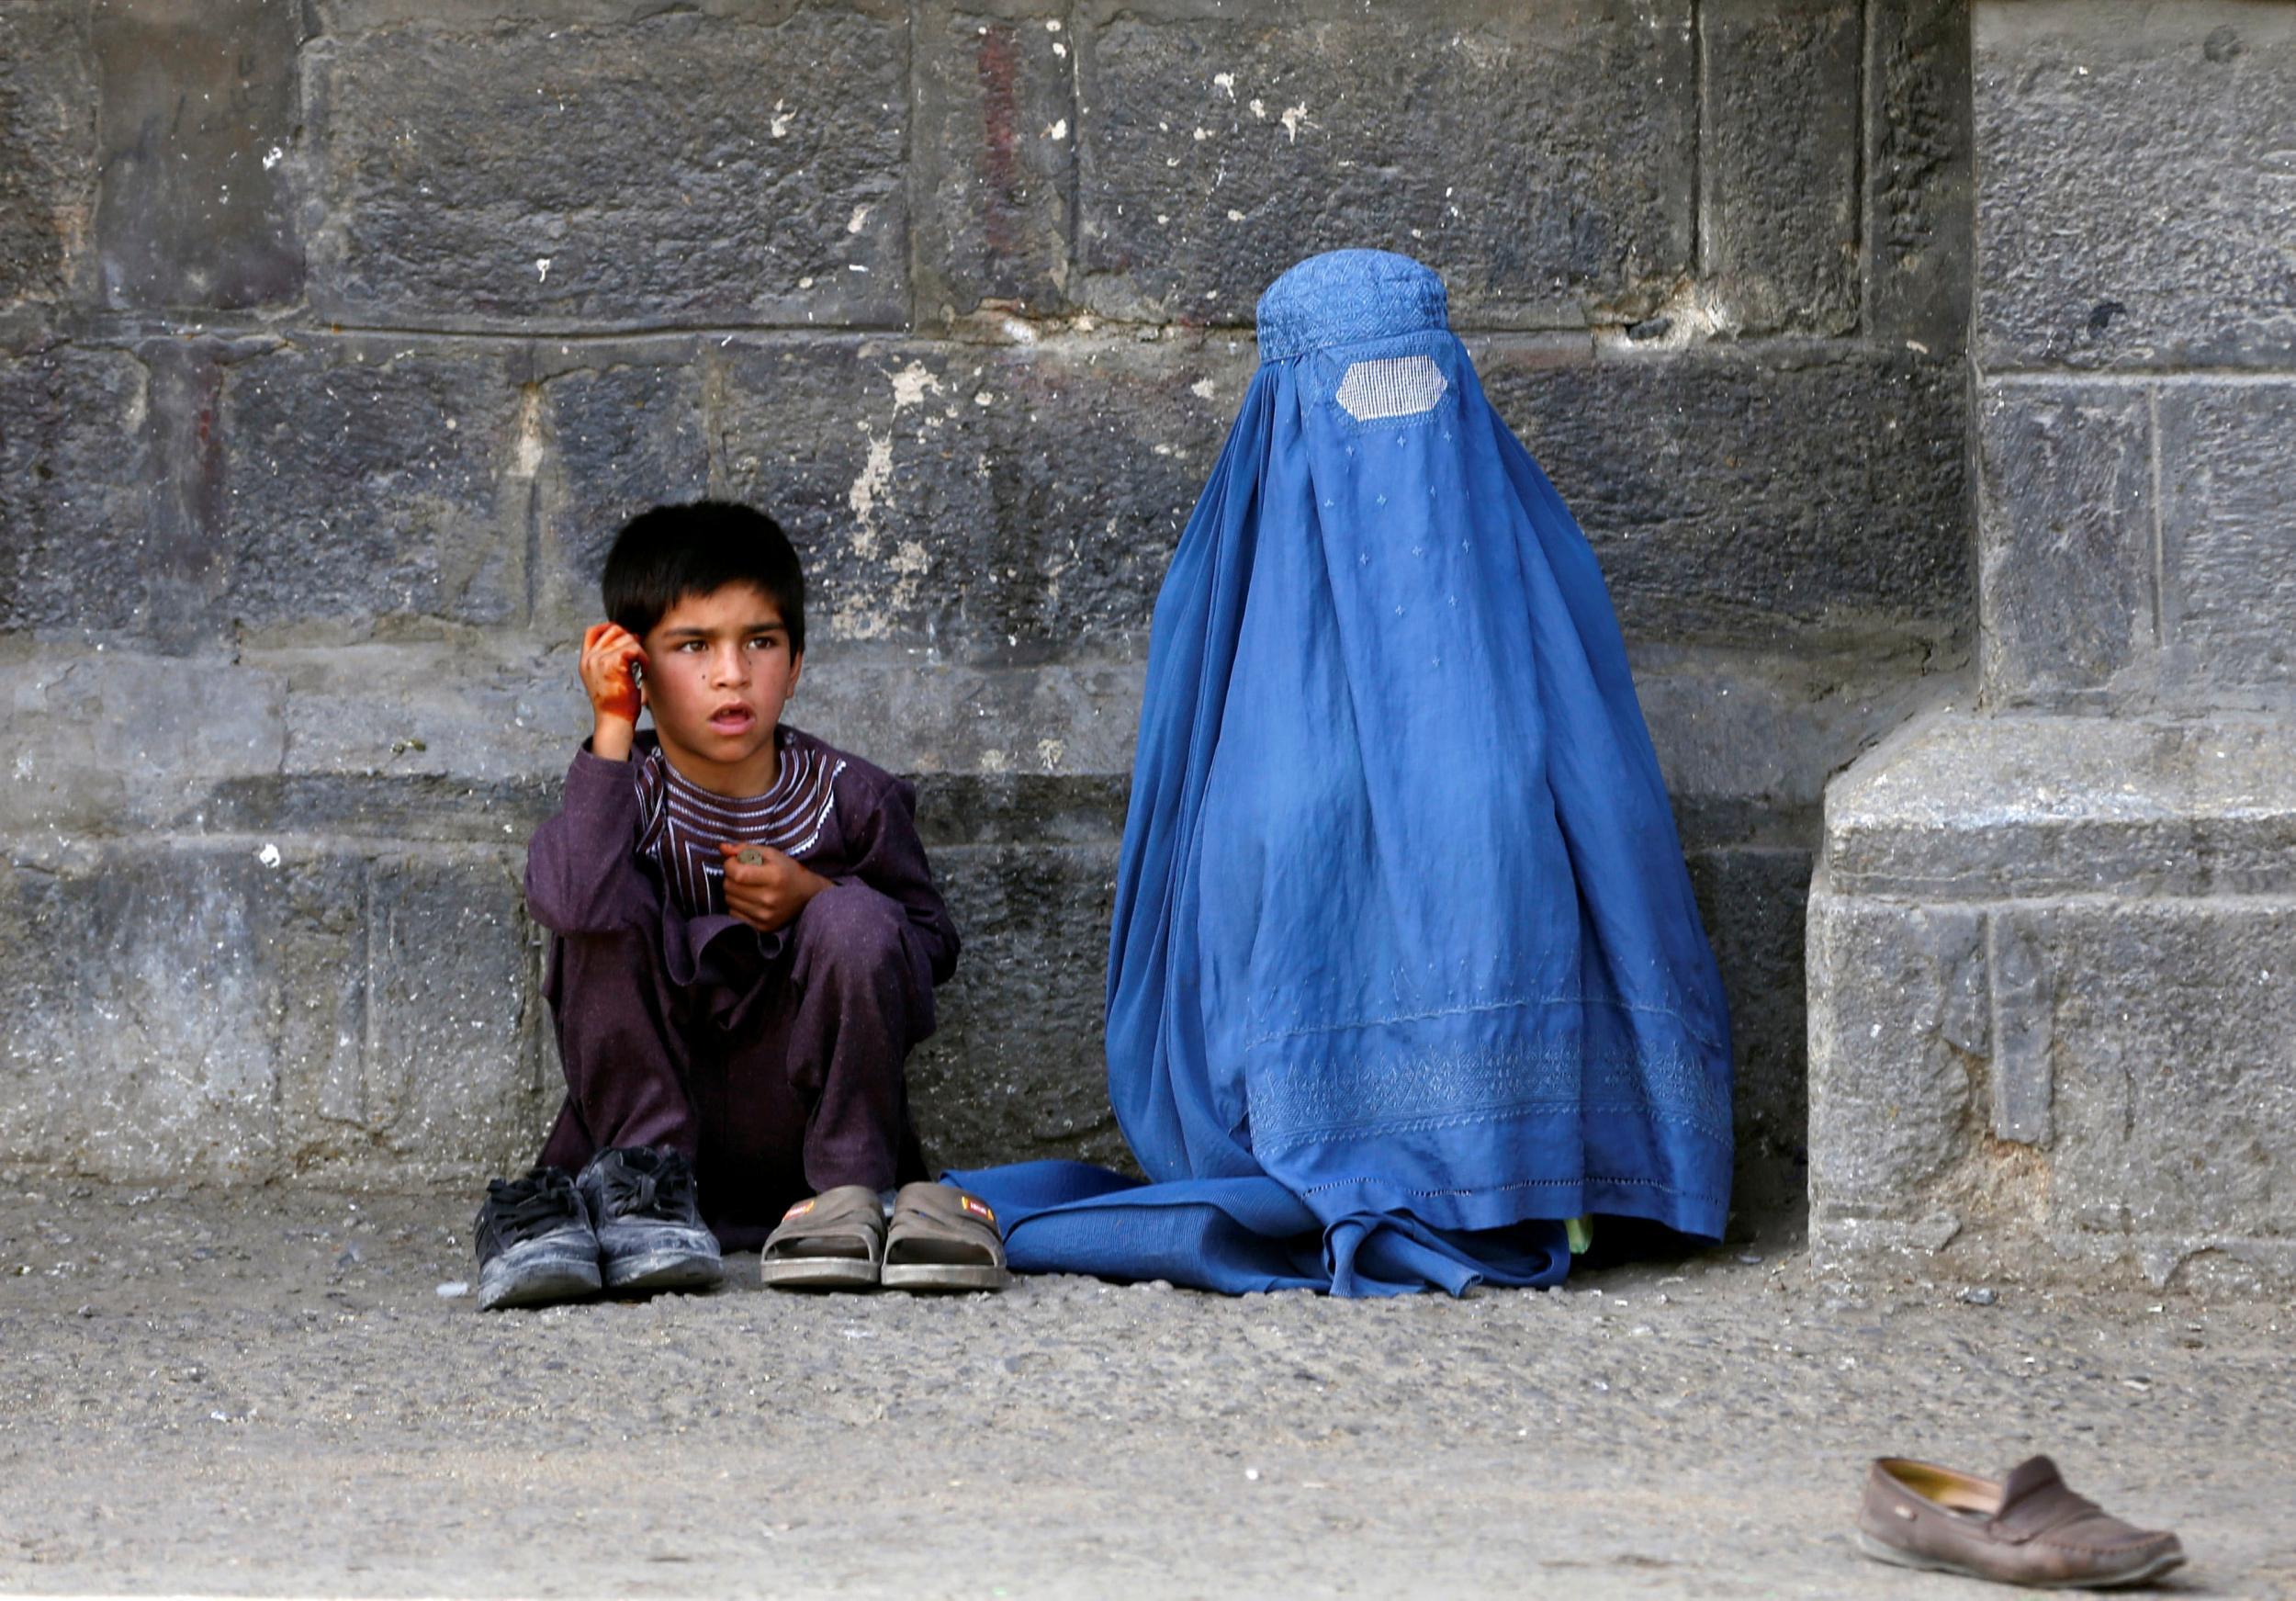 Women in Afghanistan have been failed by the West